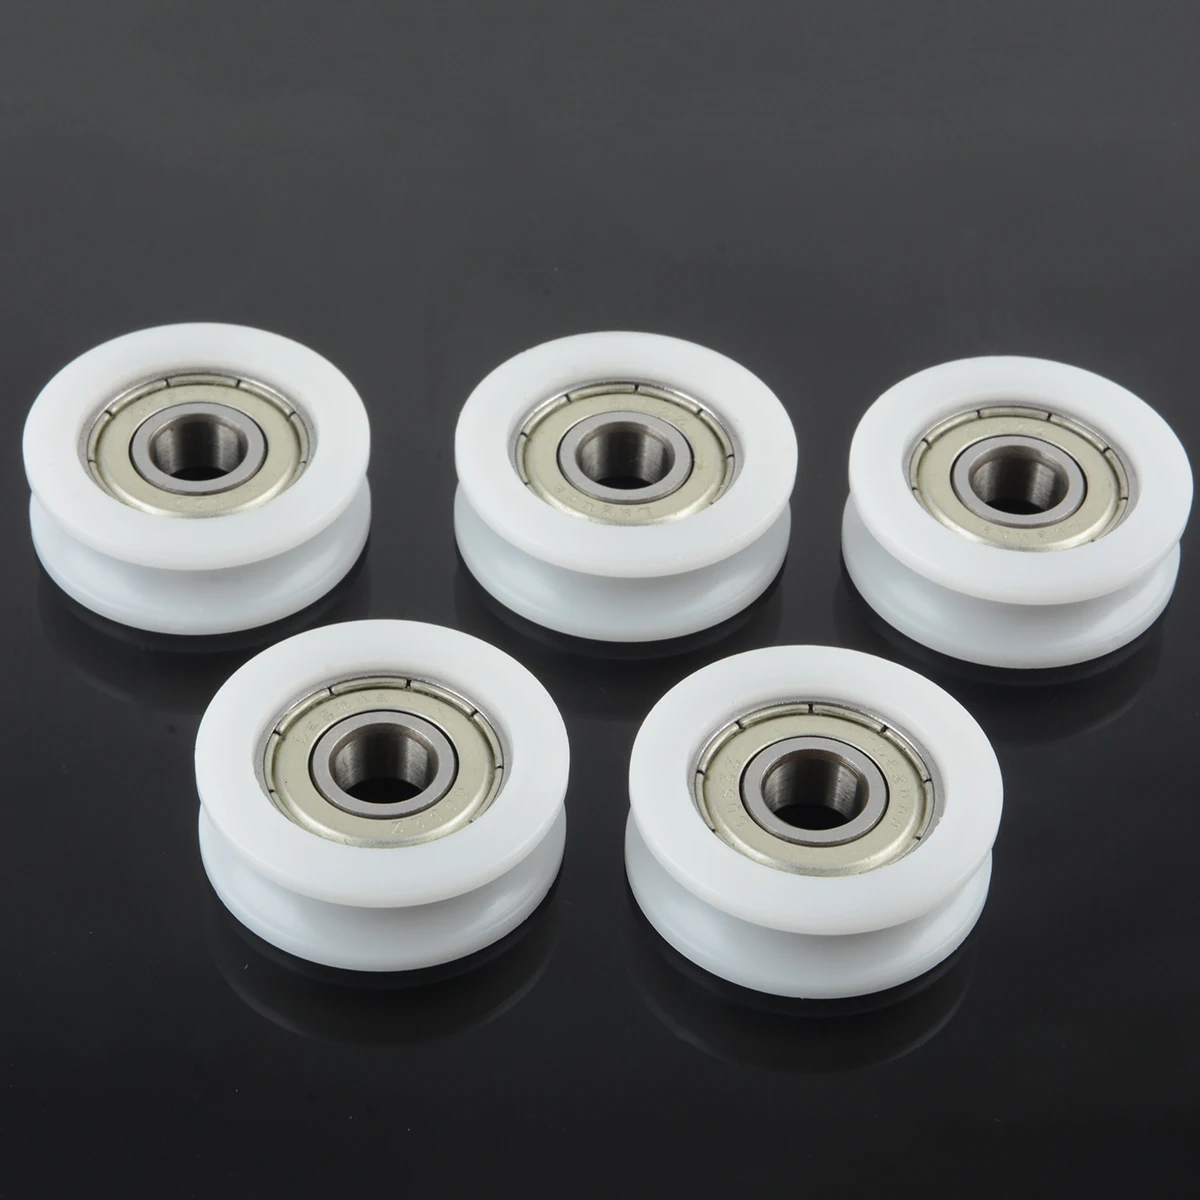 5pcs Ball Bearings 8*30*10mm Nylon Plastic Embedded High Carbon Steel 608 U Groove Ball Bearing Guide Pulley For Mobile Doors